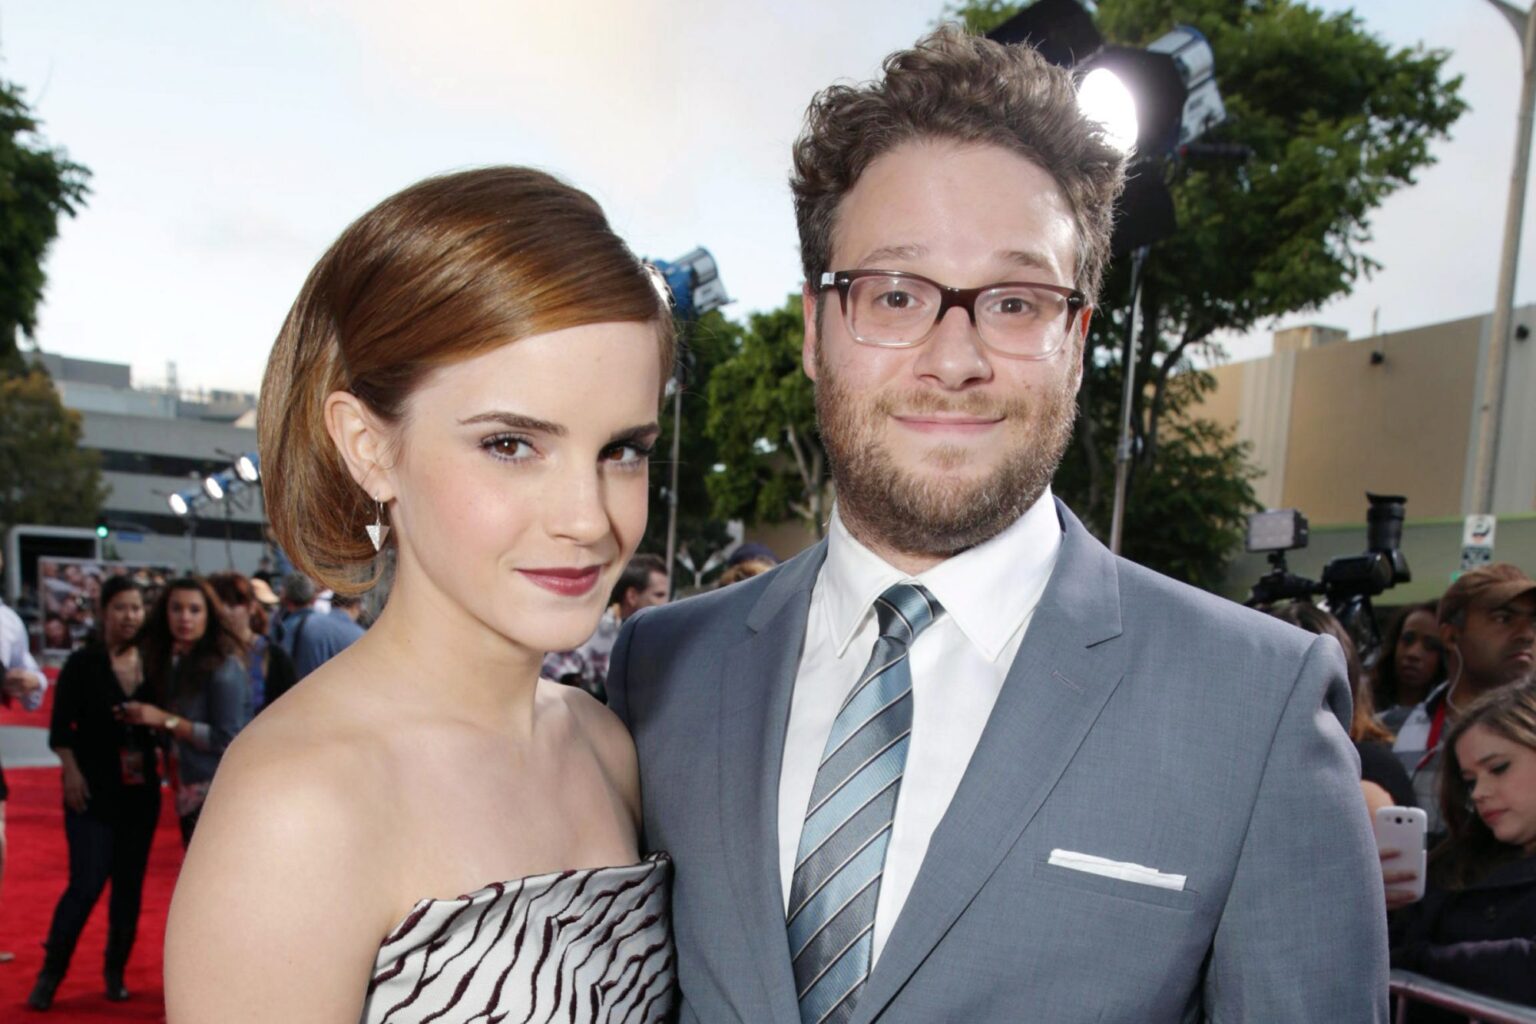 What did Seth Rogen say about Emma Watson's behavior during production of 'This is the End'? Grab your apocalyptic movie gear and check out his statement.